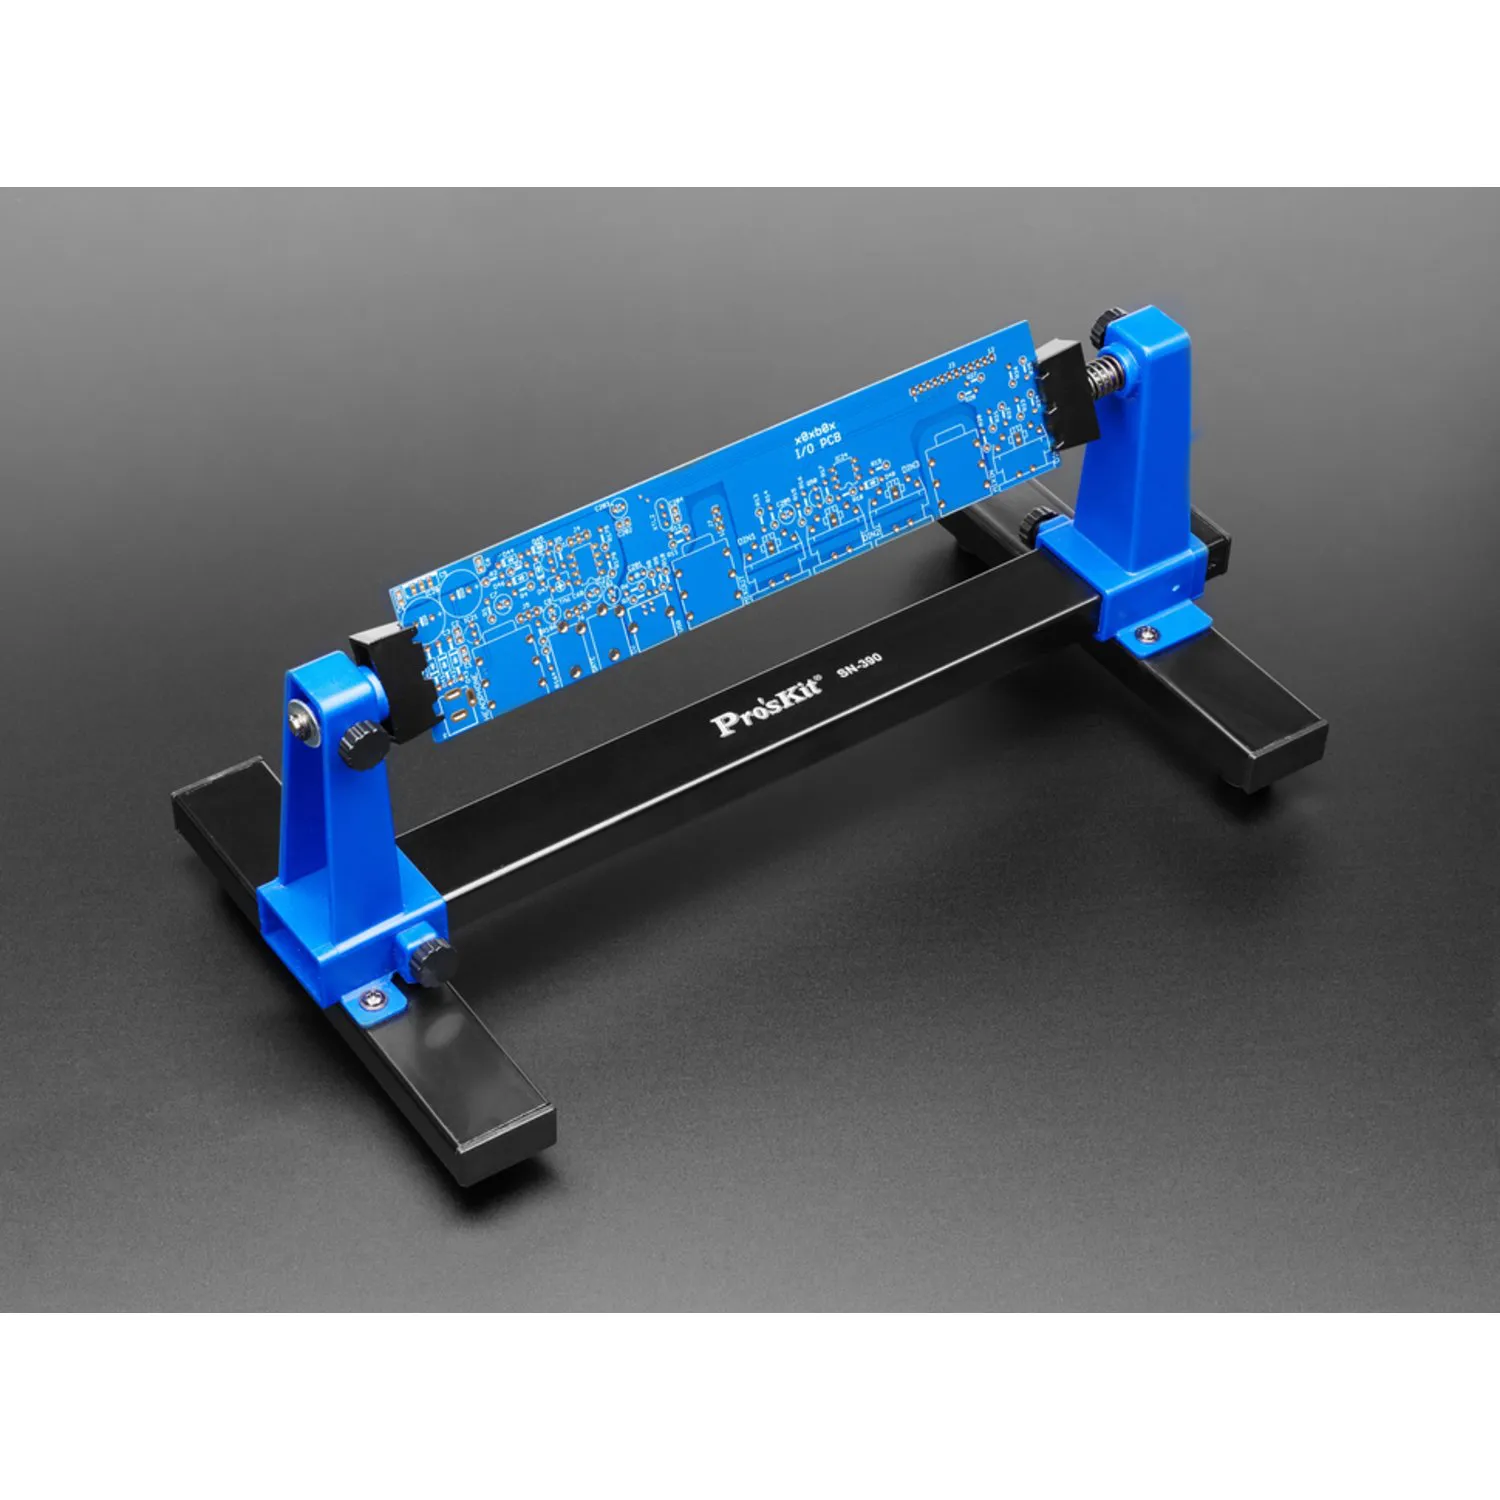 Photo of Fully Adjustable PCB Clamp Holder - Pro's Kit SN-390